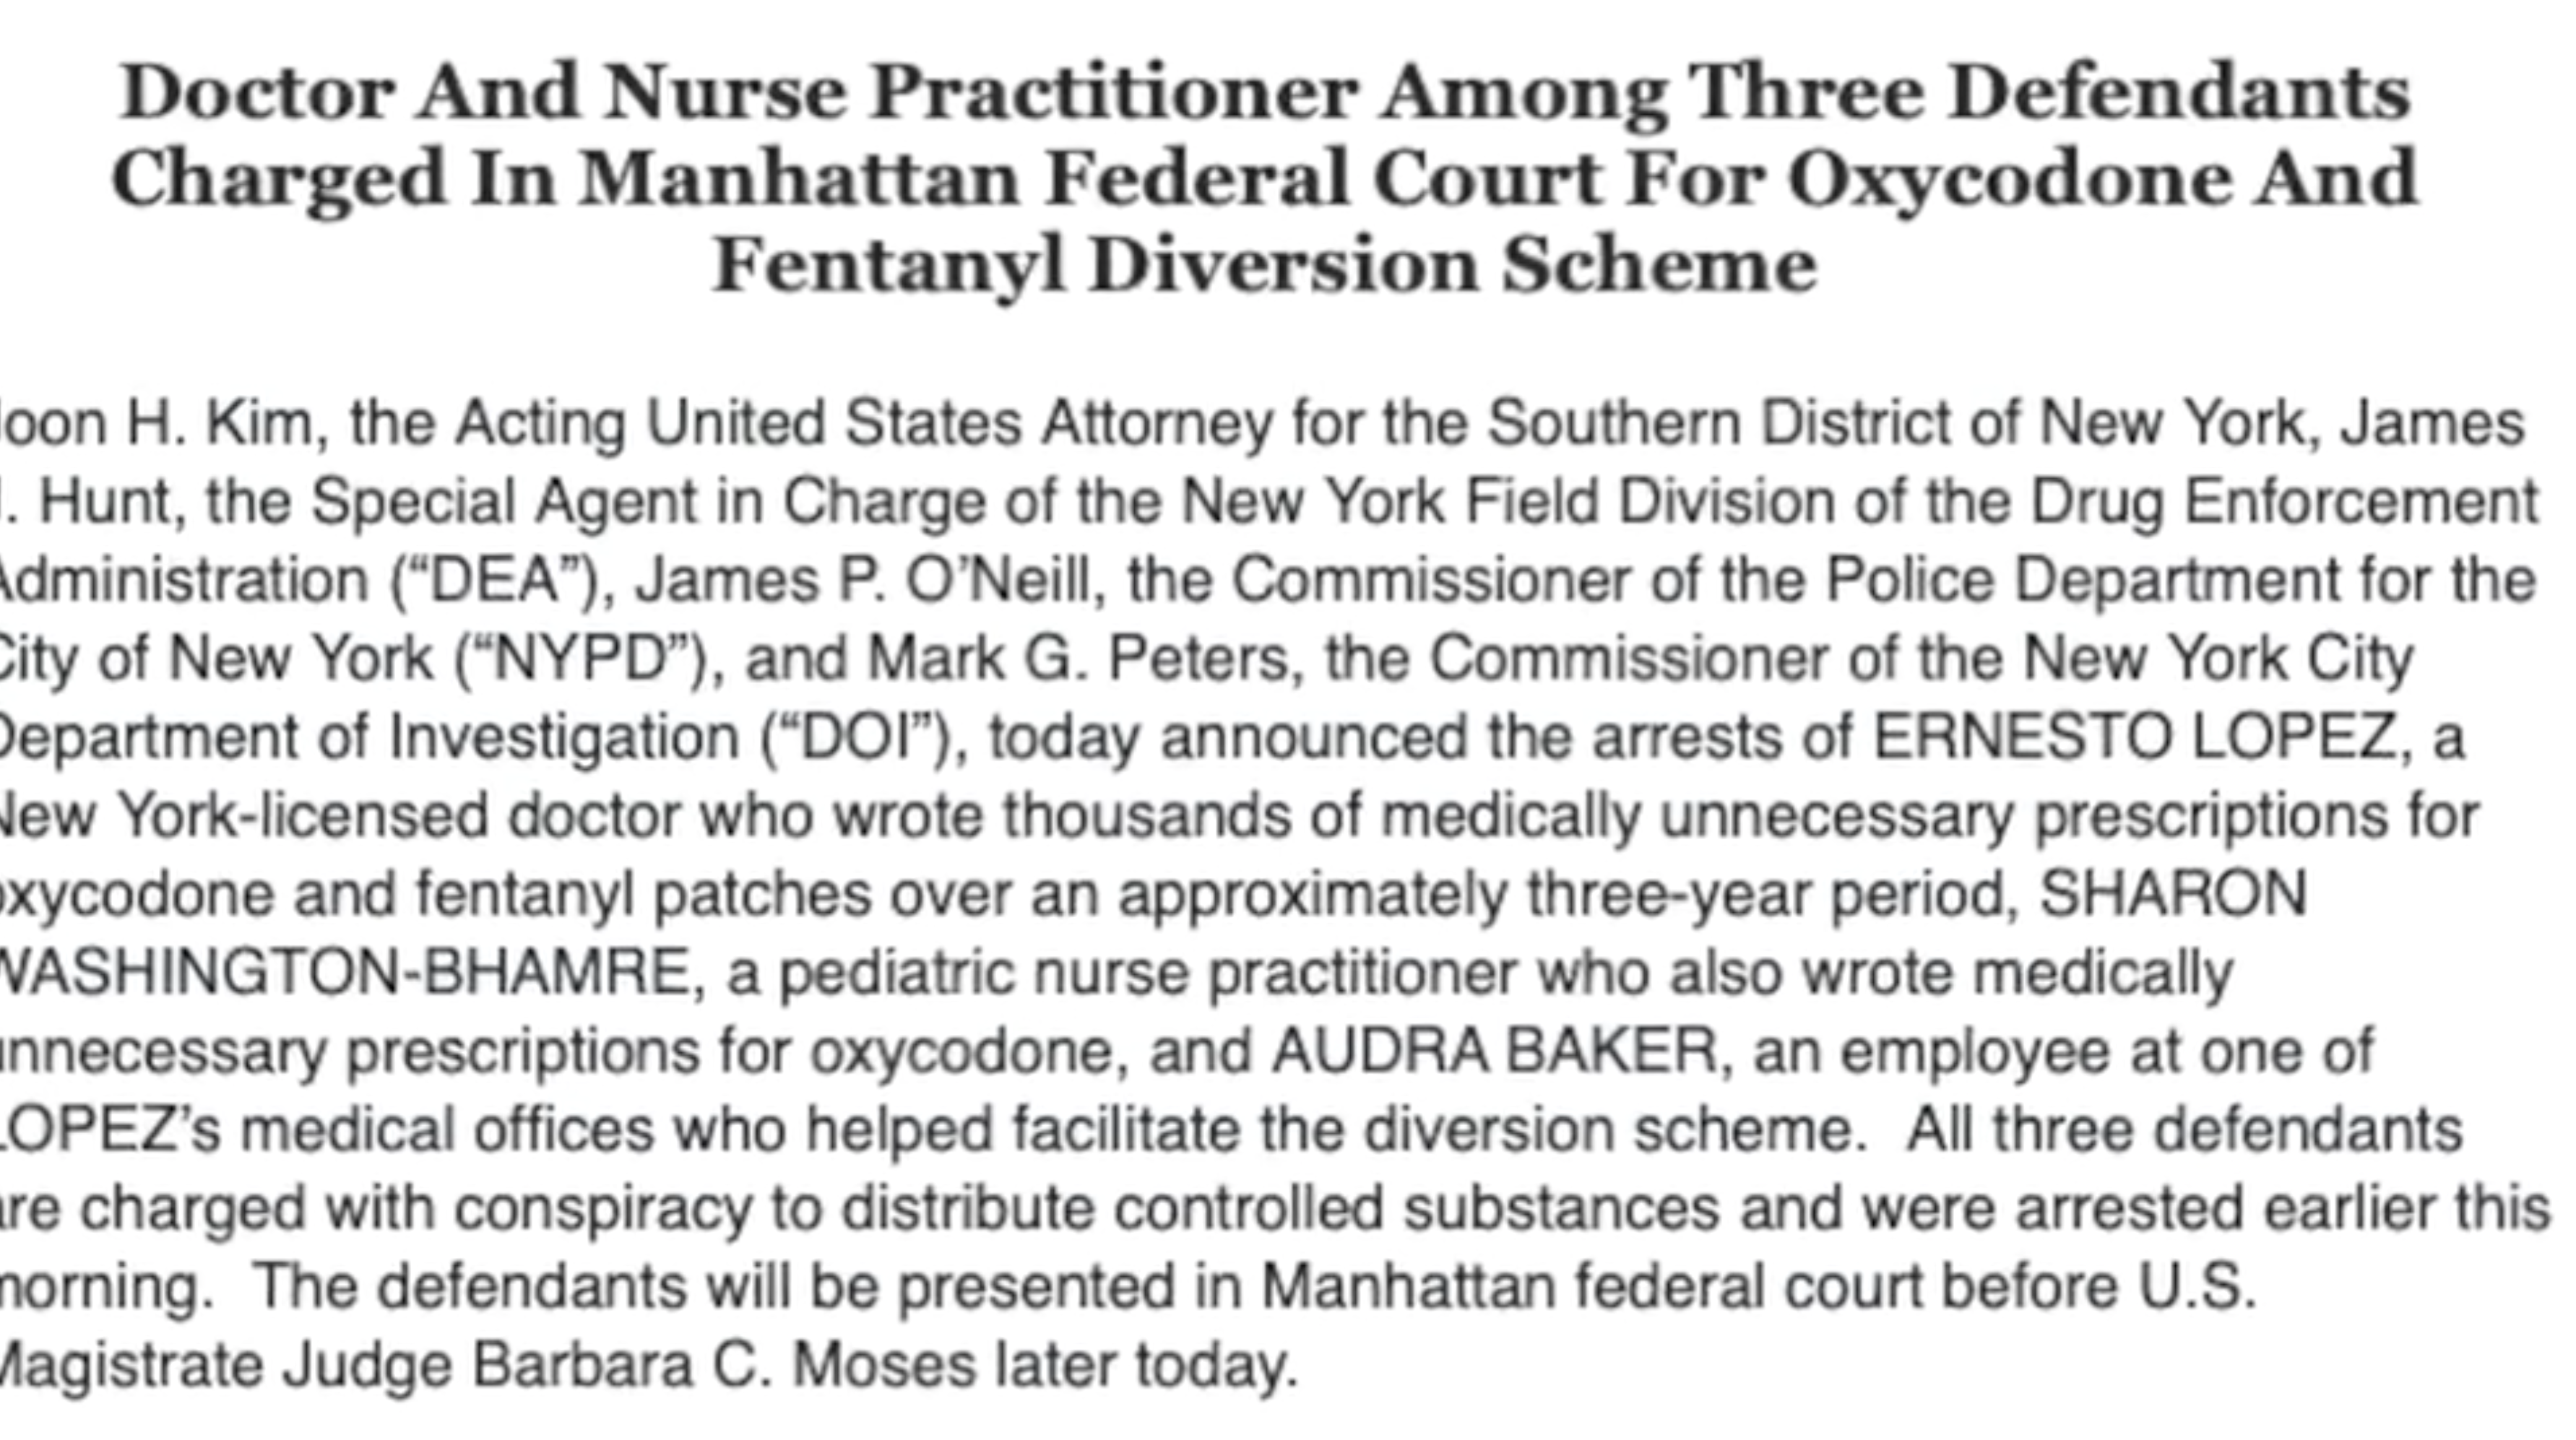 Doctor and nurse practitioner among three defendants charged in Manhattan federal court for oxycodone and fentanyl diversion scheme